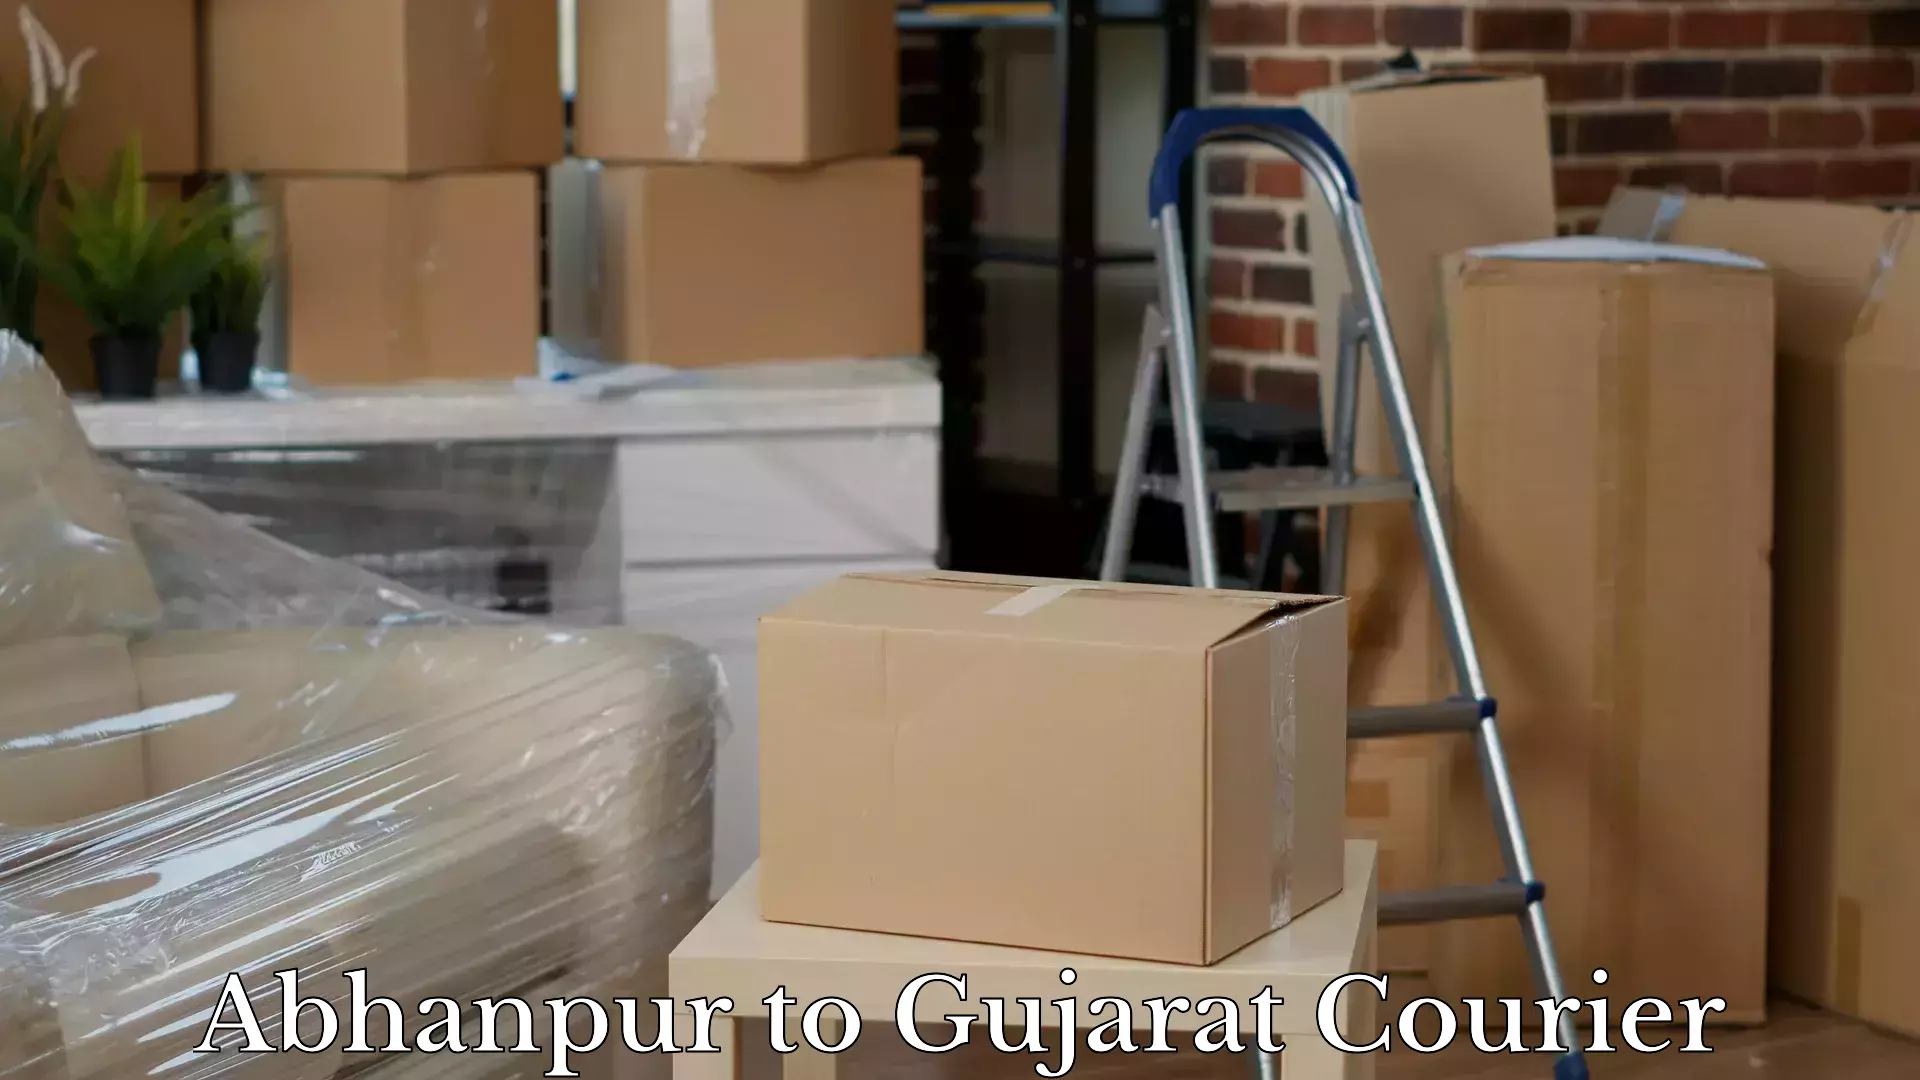 Luggage transport deals Abhanpur to Gujarat